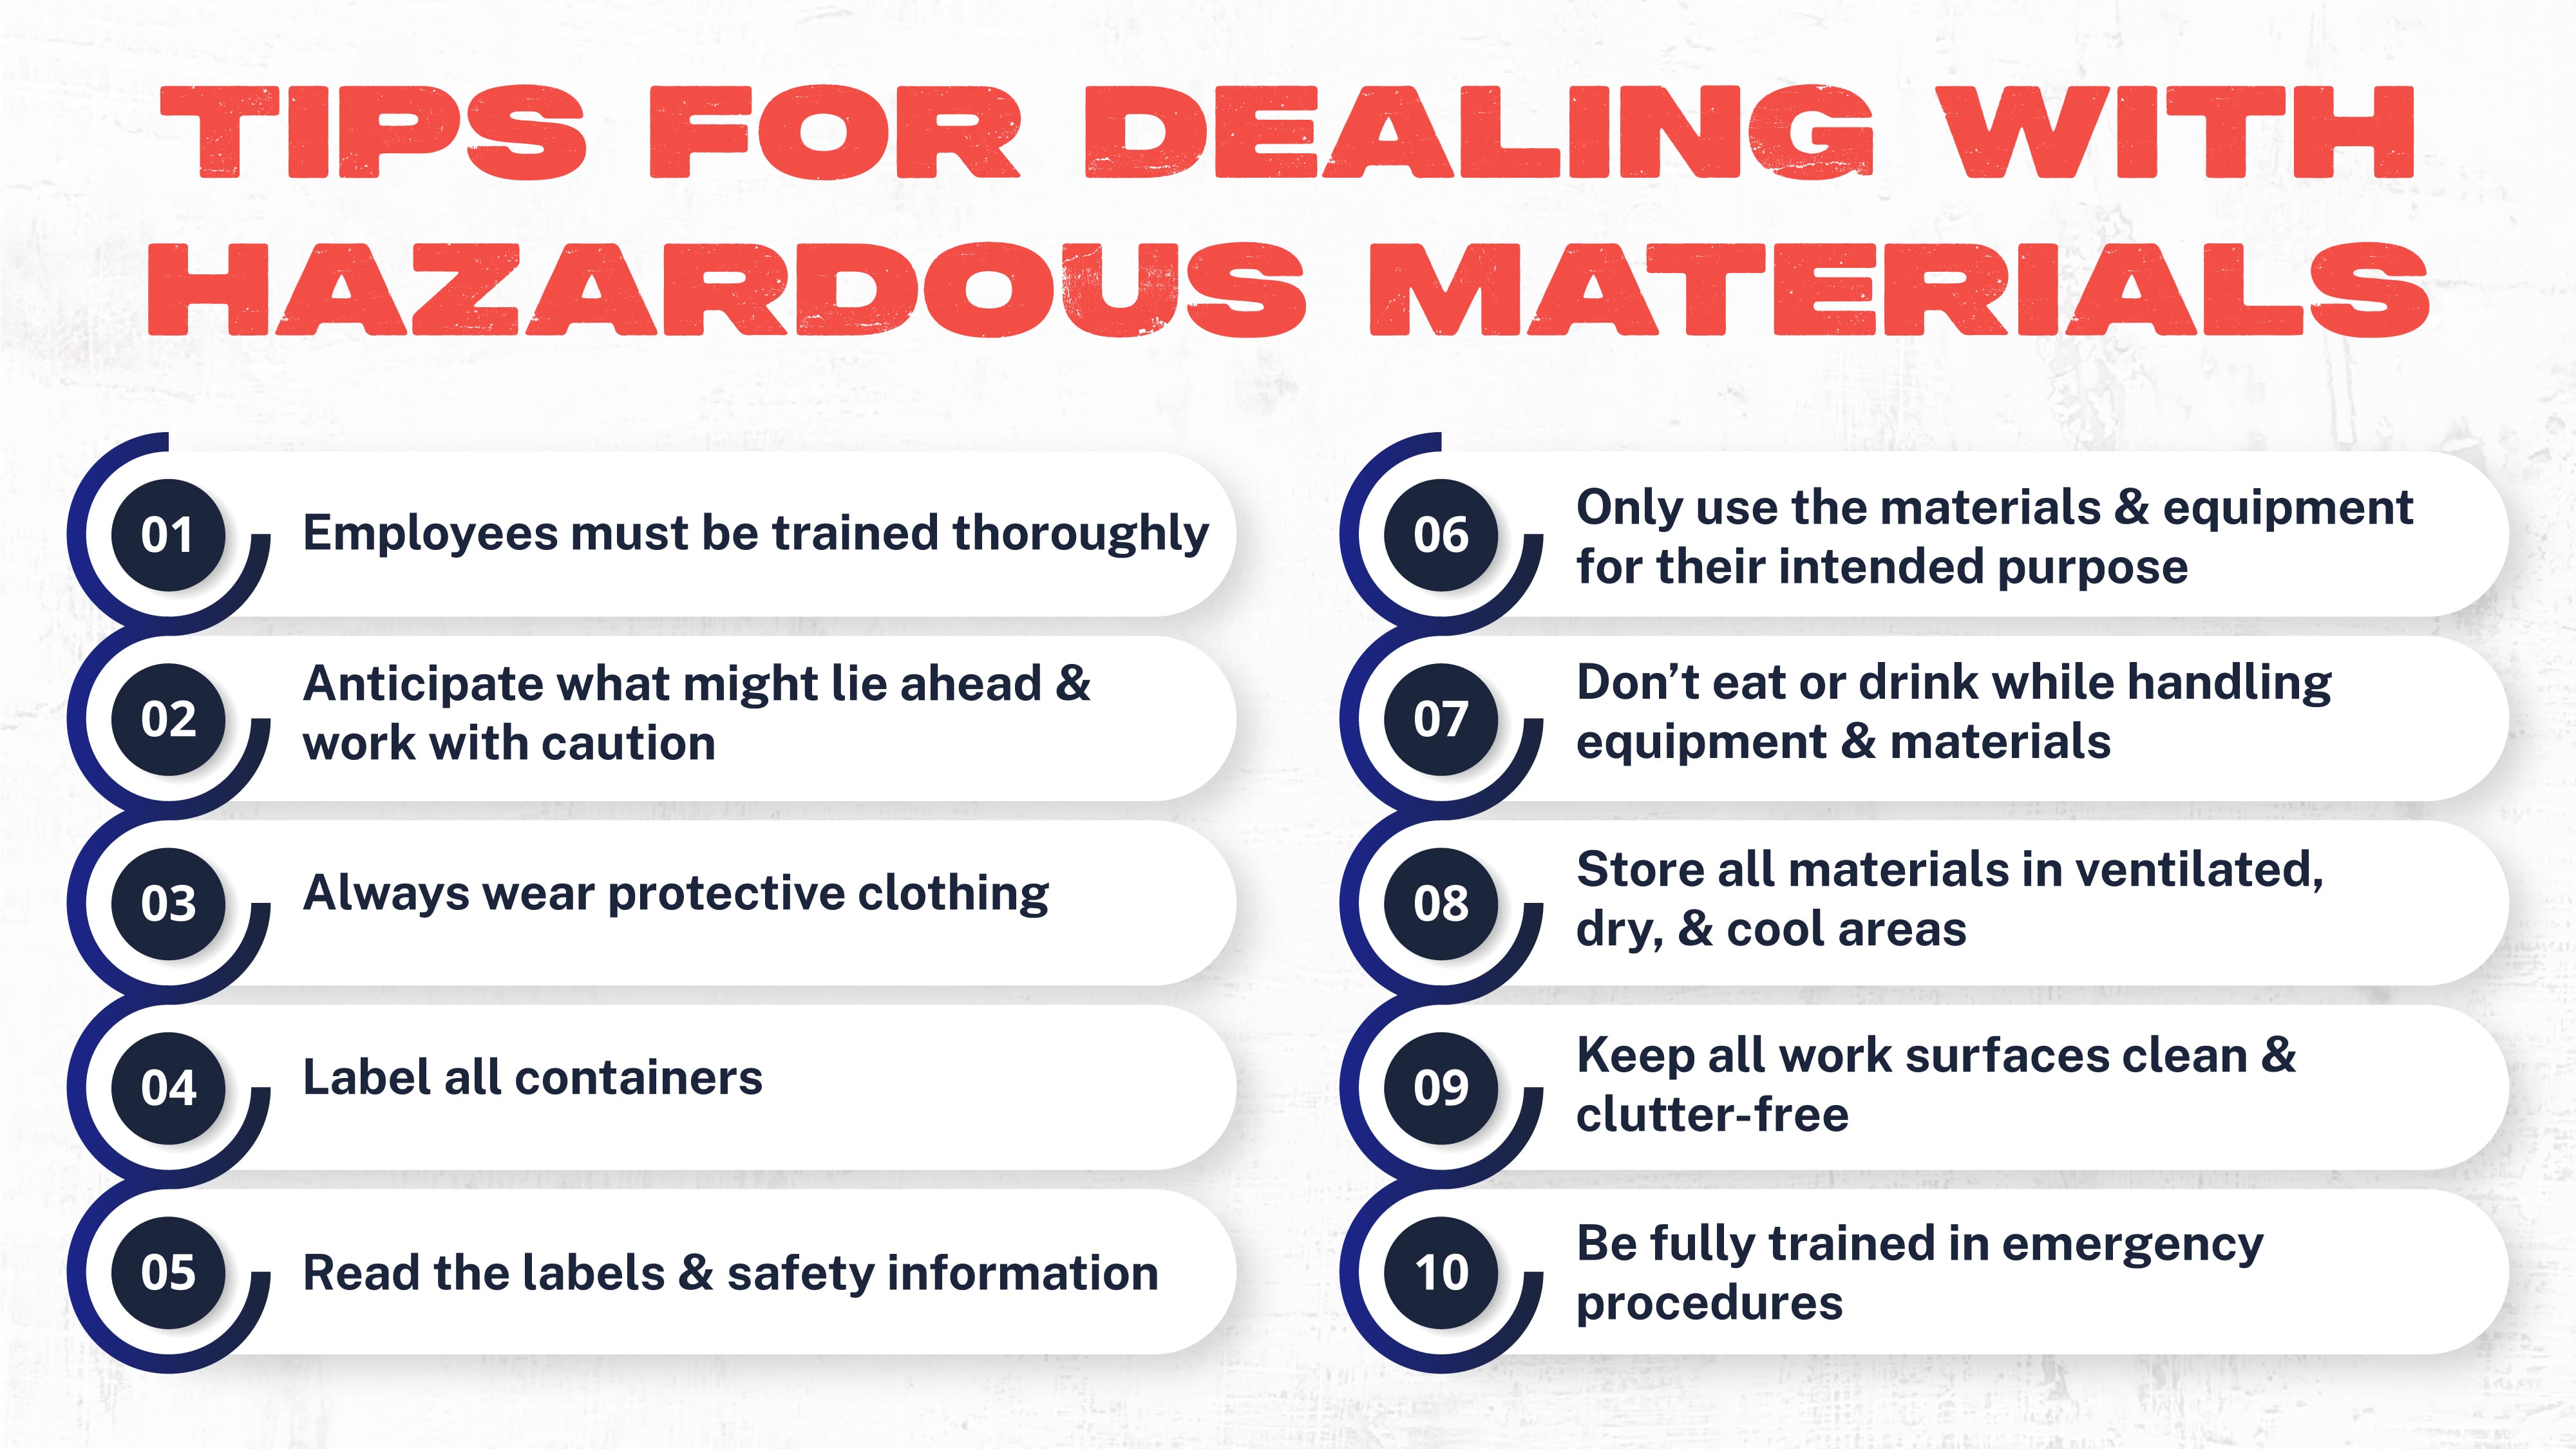 TIPS FOR DEALING WITH HAZARDOUS MATERIALS